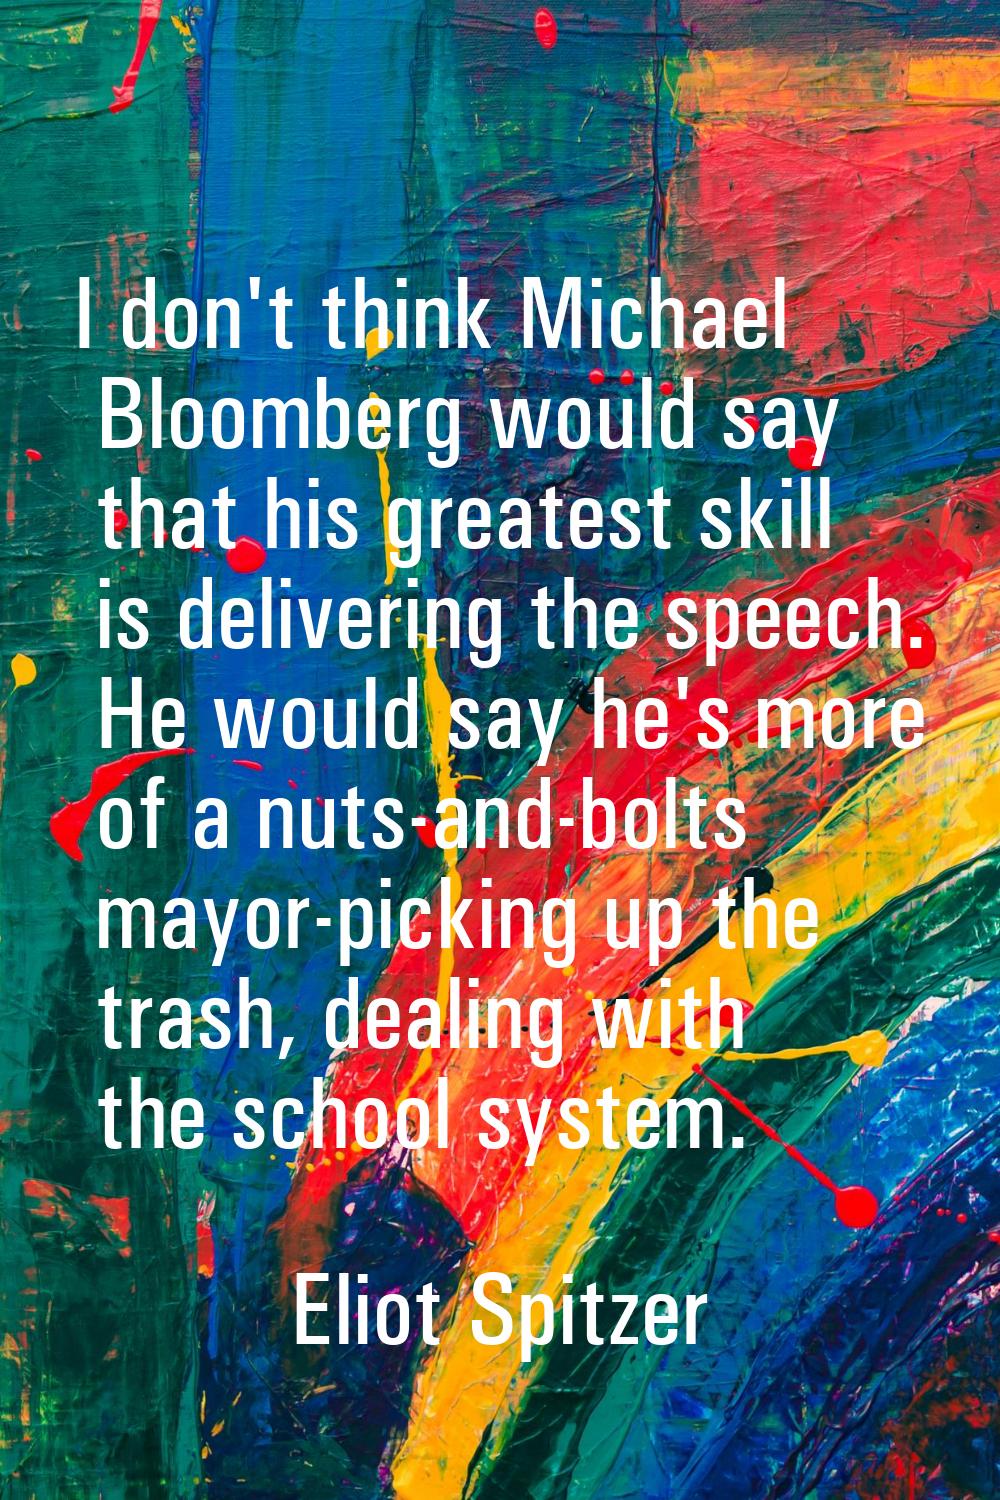 I don't think Michael Bloomberg would say that his greatest skill is delivering the speech. He woul